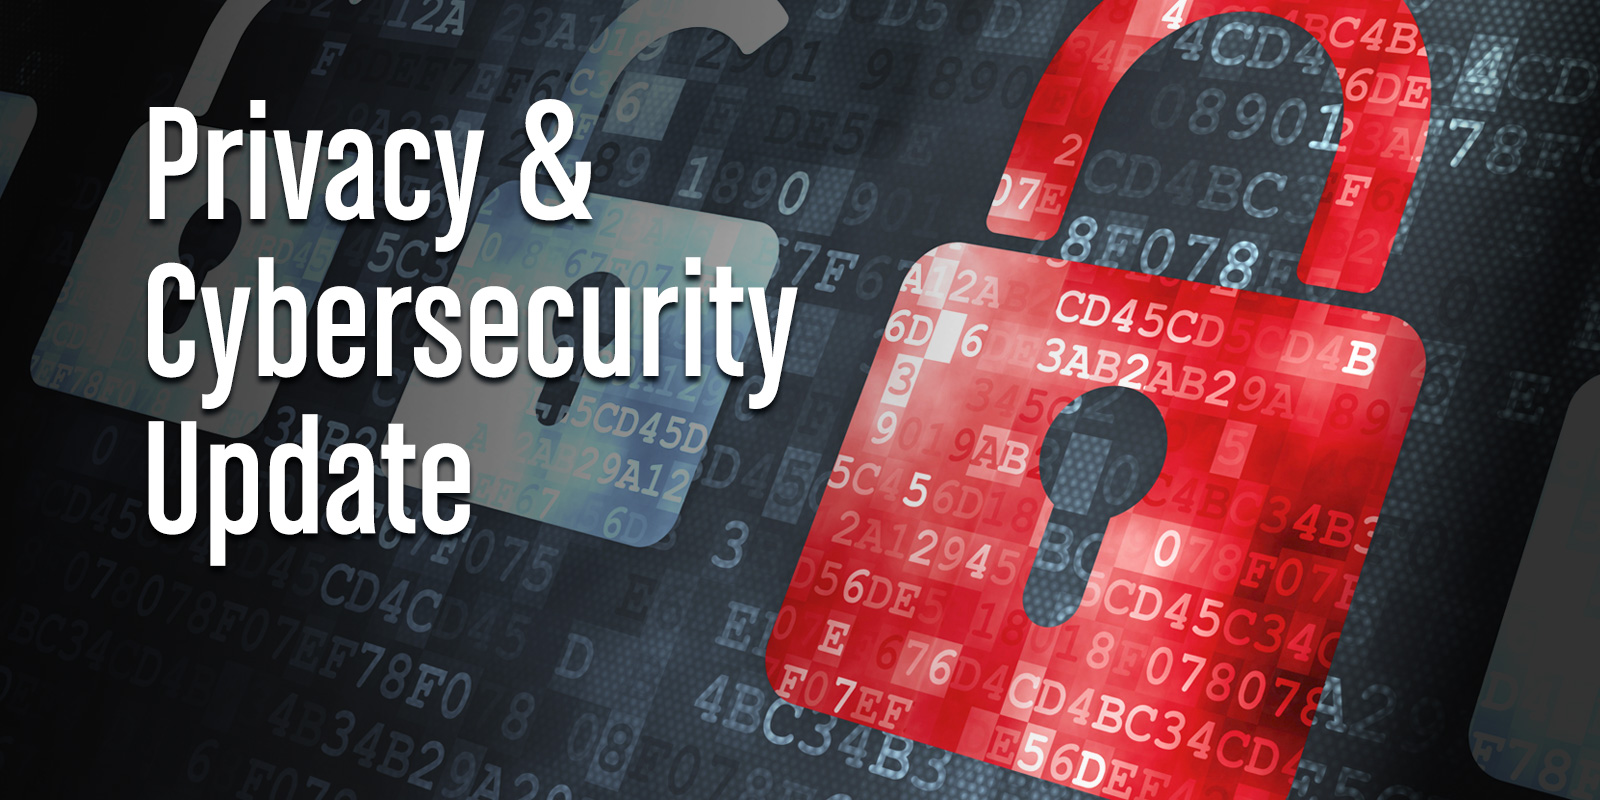 PrivacyCybersecurityUpdate